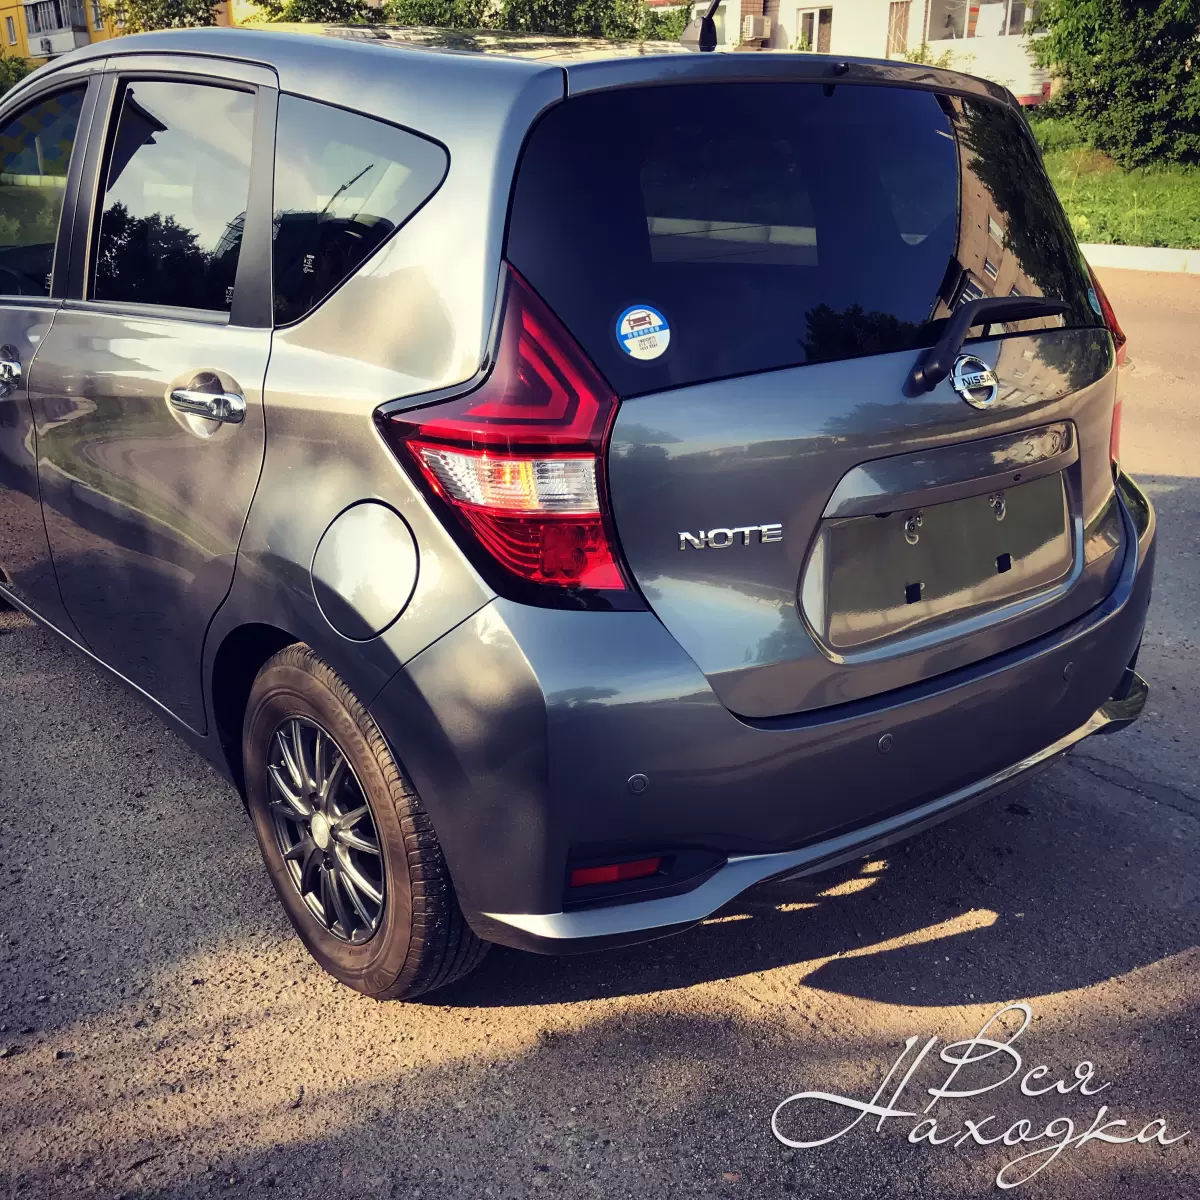 Nissan note 2018. Ниссан ноут 2018. Nissan Note Nismo 2018. Nissan Note 2.